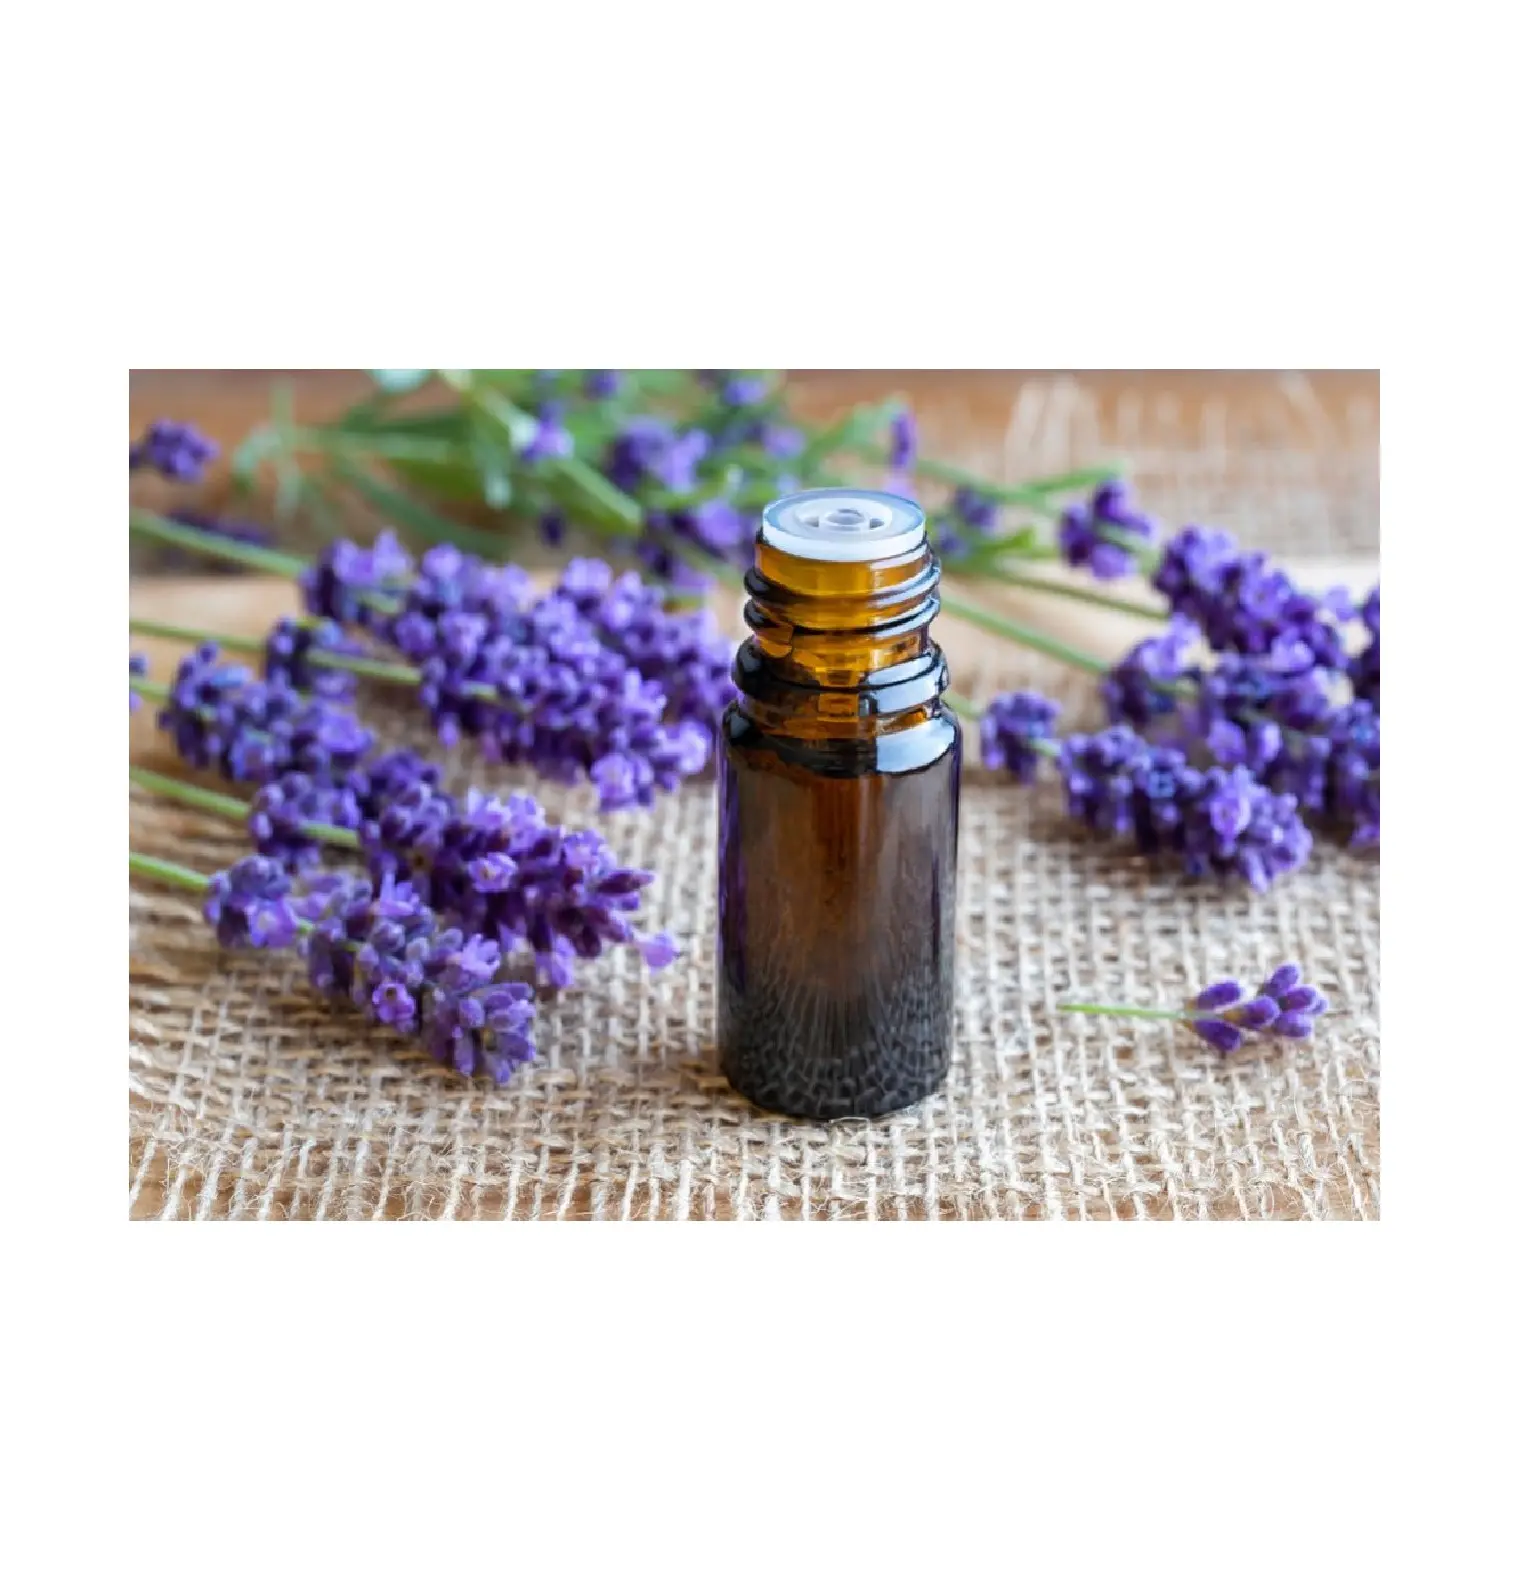 LAVENDER ESSENTIAL OIL FROM NATURAL TEA TREE/ LAVENDER ESSENTIAL OIL (Jasmine: 0099 GOLD DATA)